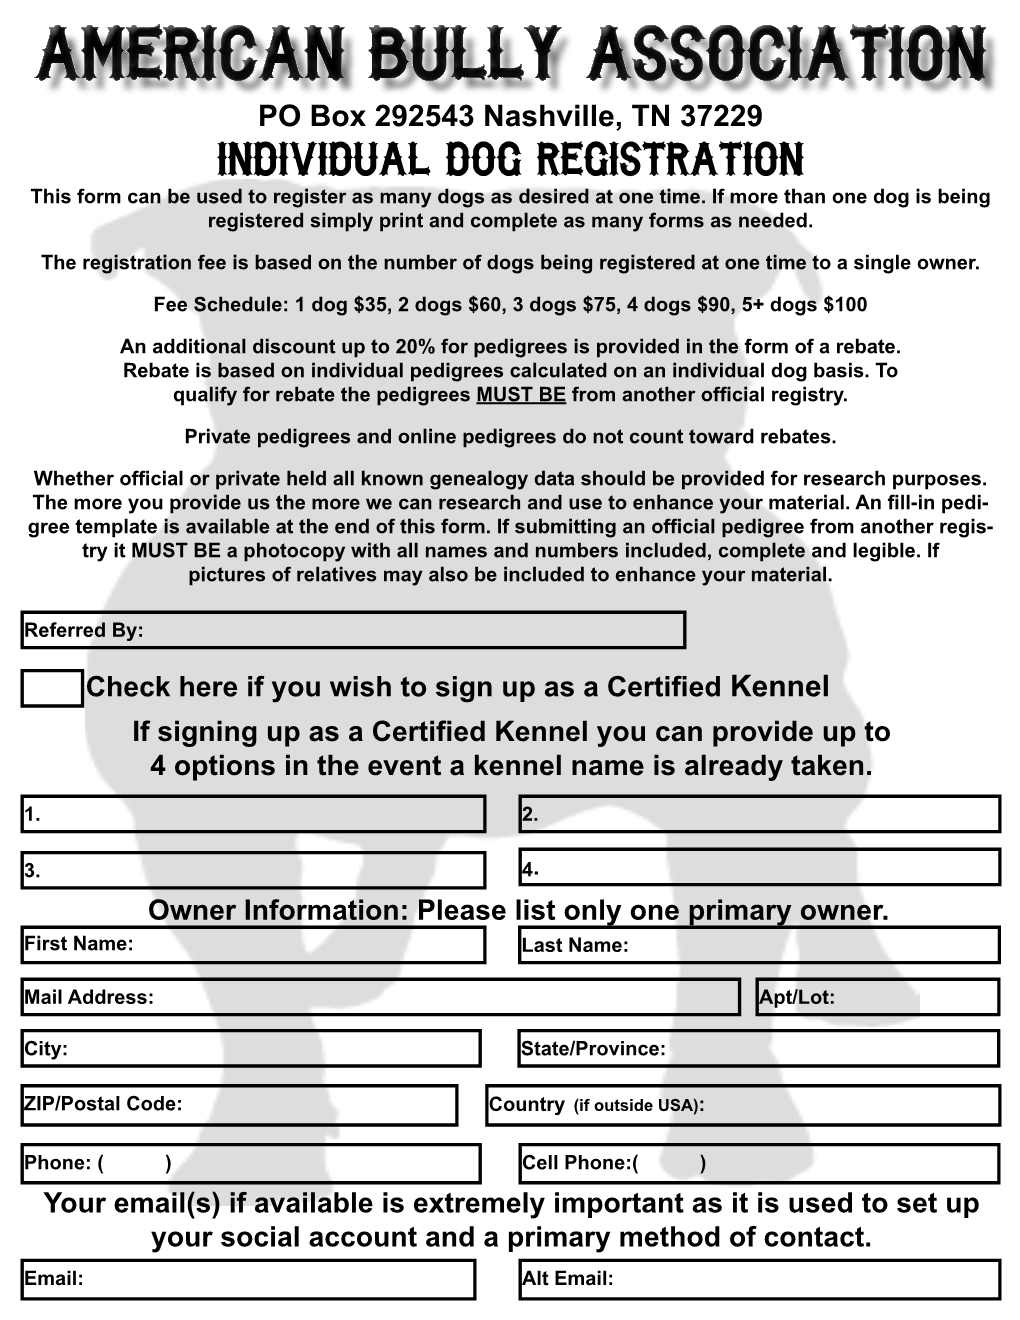 Individual Dog Registration This Form Can Be Used to Register As Many Dogs As Desired at One Time